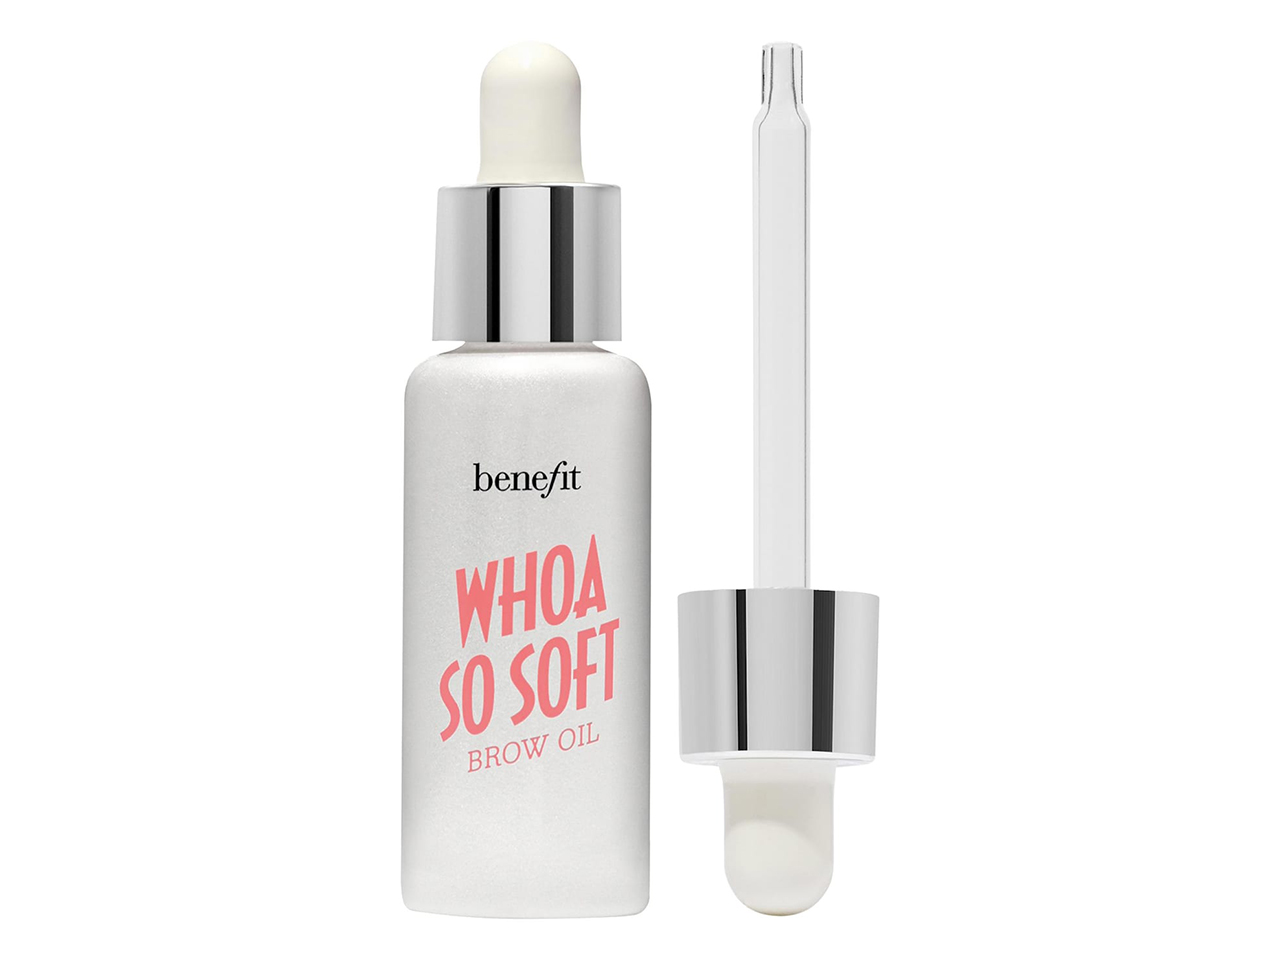 A bottle of Whoa So Soft brow oil from Benefit Cosmetics.